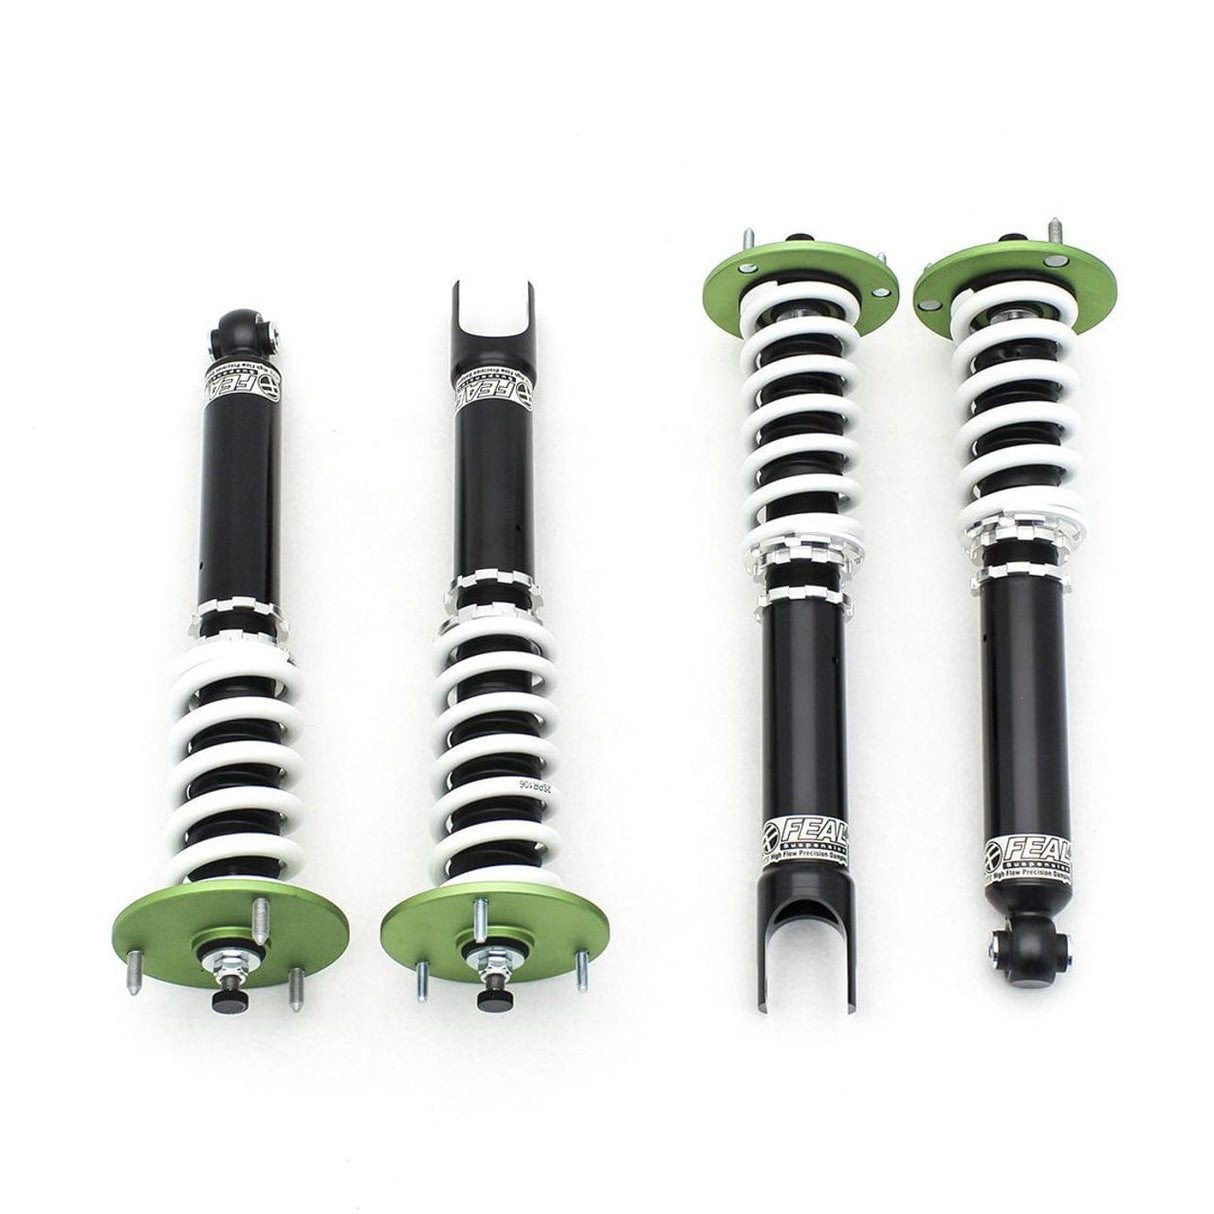 Feal 441 Coilovers - 1994-1998 Mitsubishi Galant